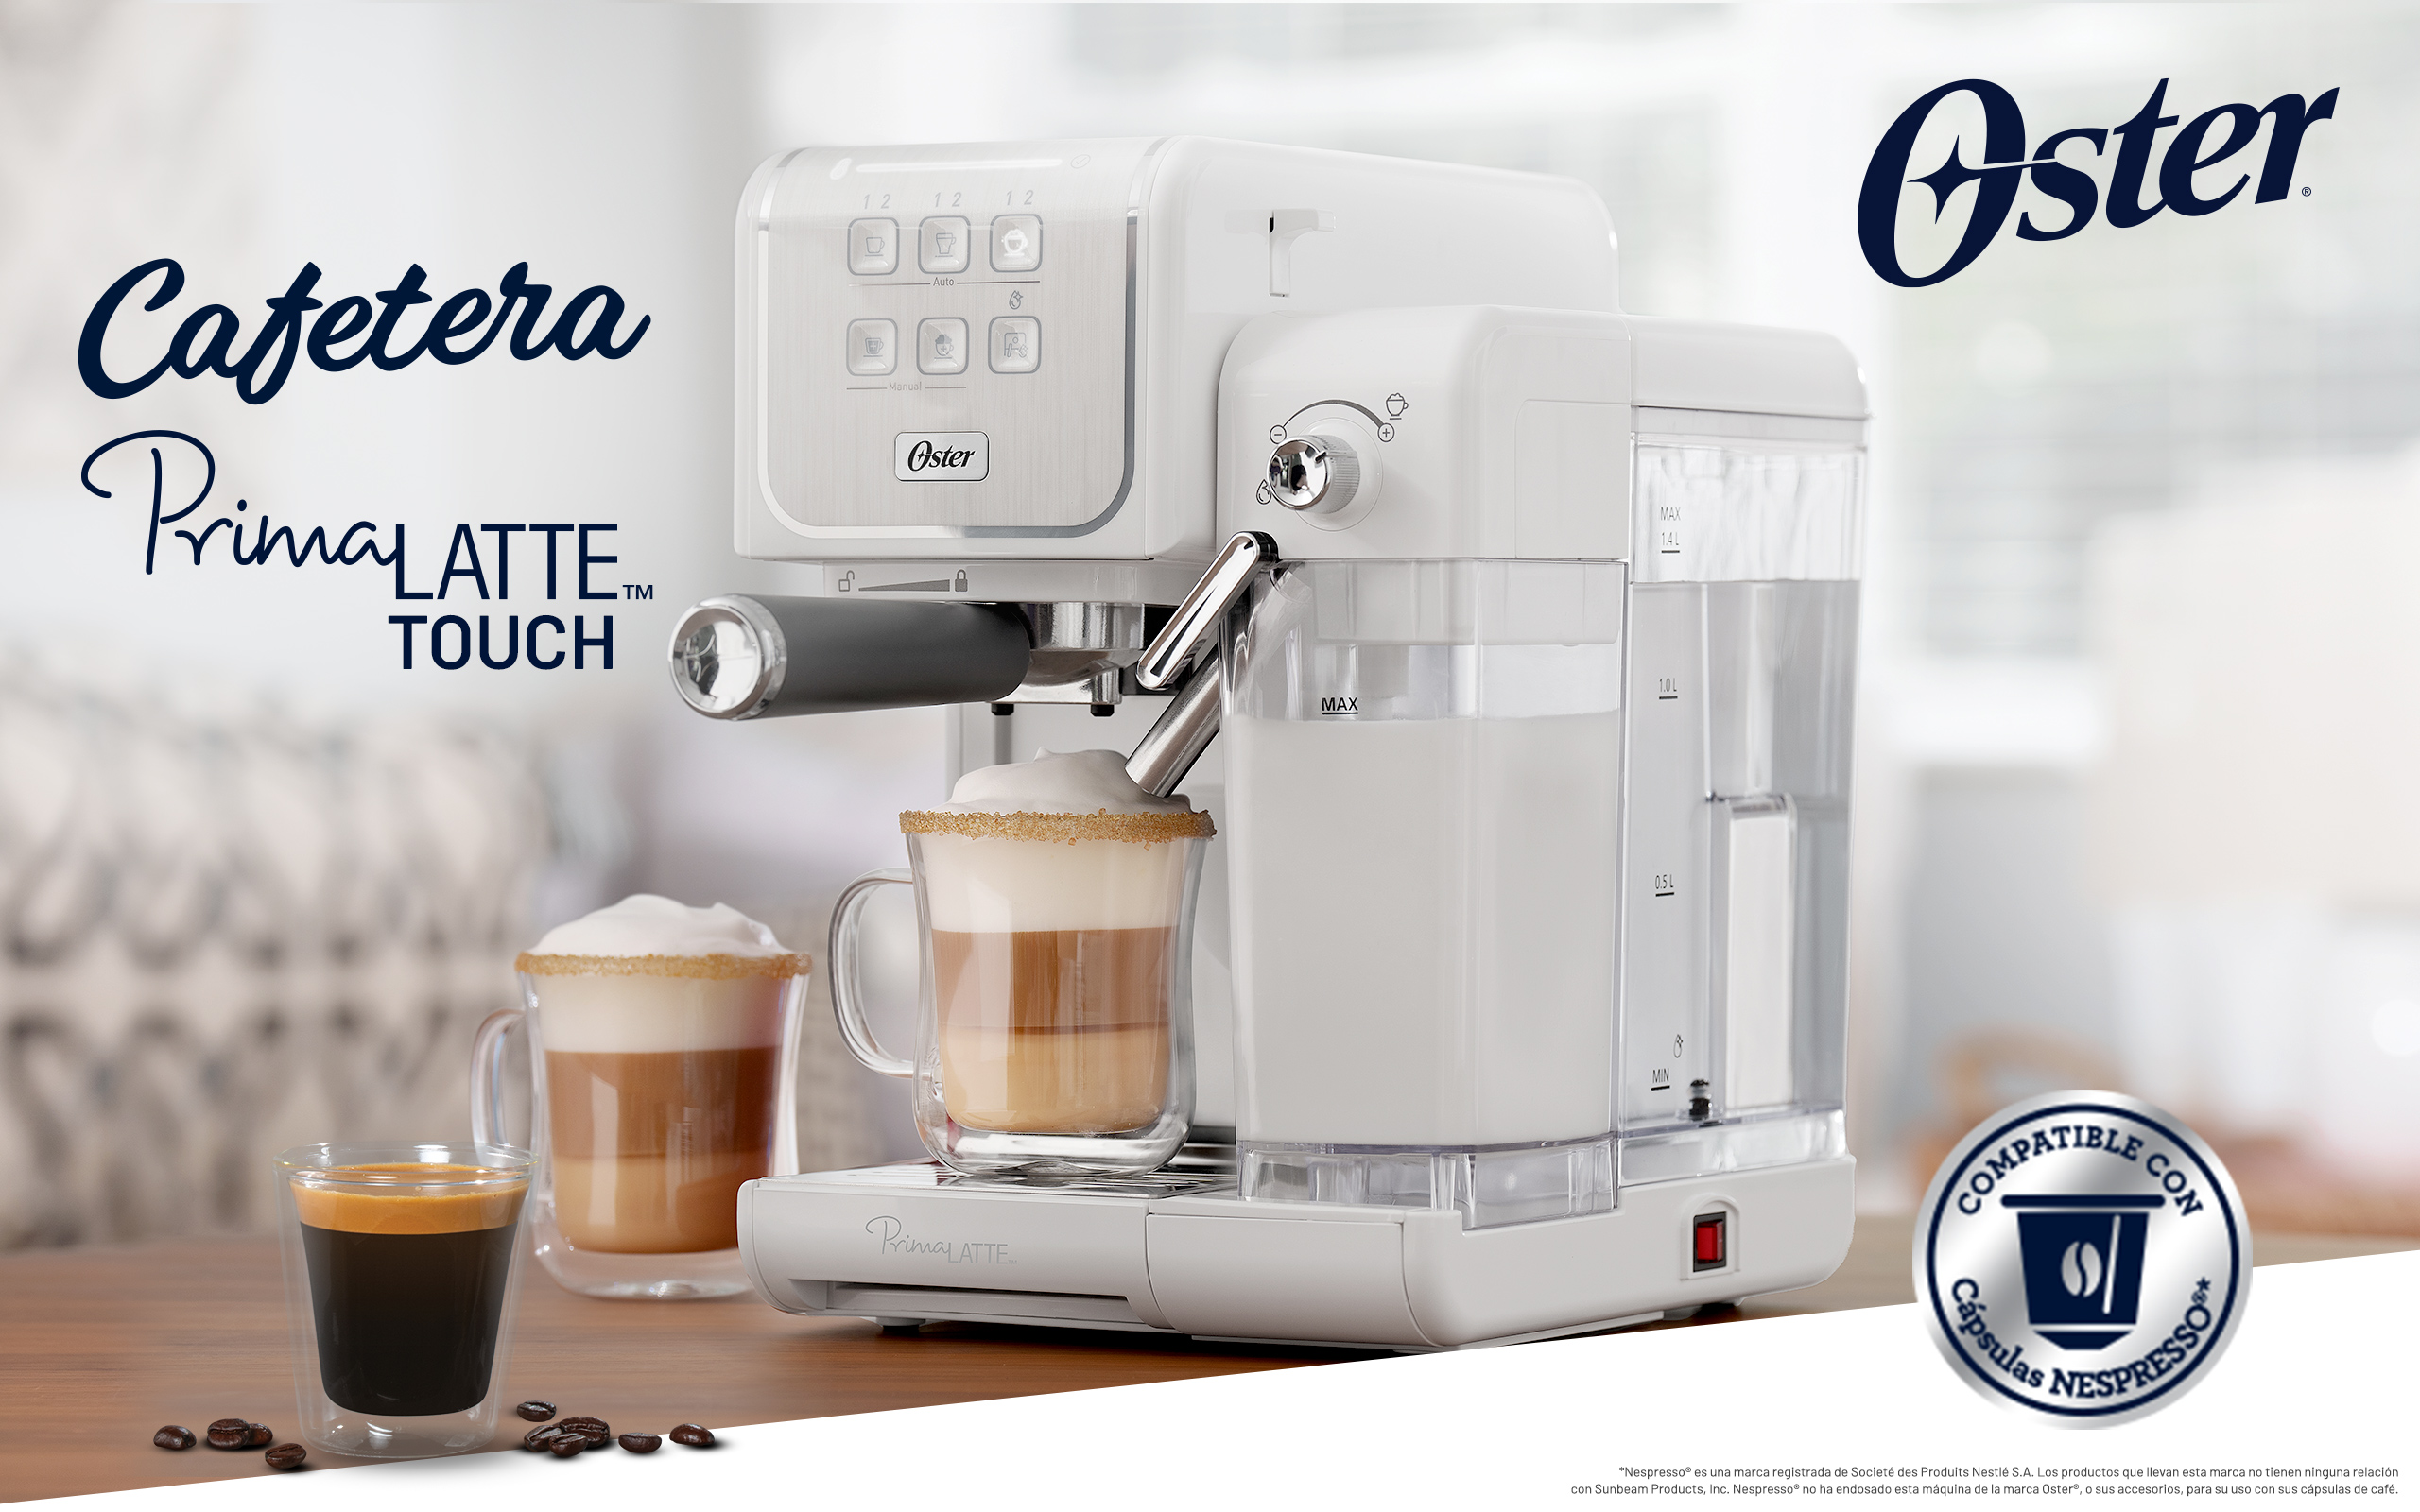 CAFETERA OSTER BVSTEM6801M EXPRESSO/CAPUCHINO PRIMALATE 2 19BARES